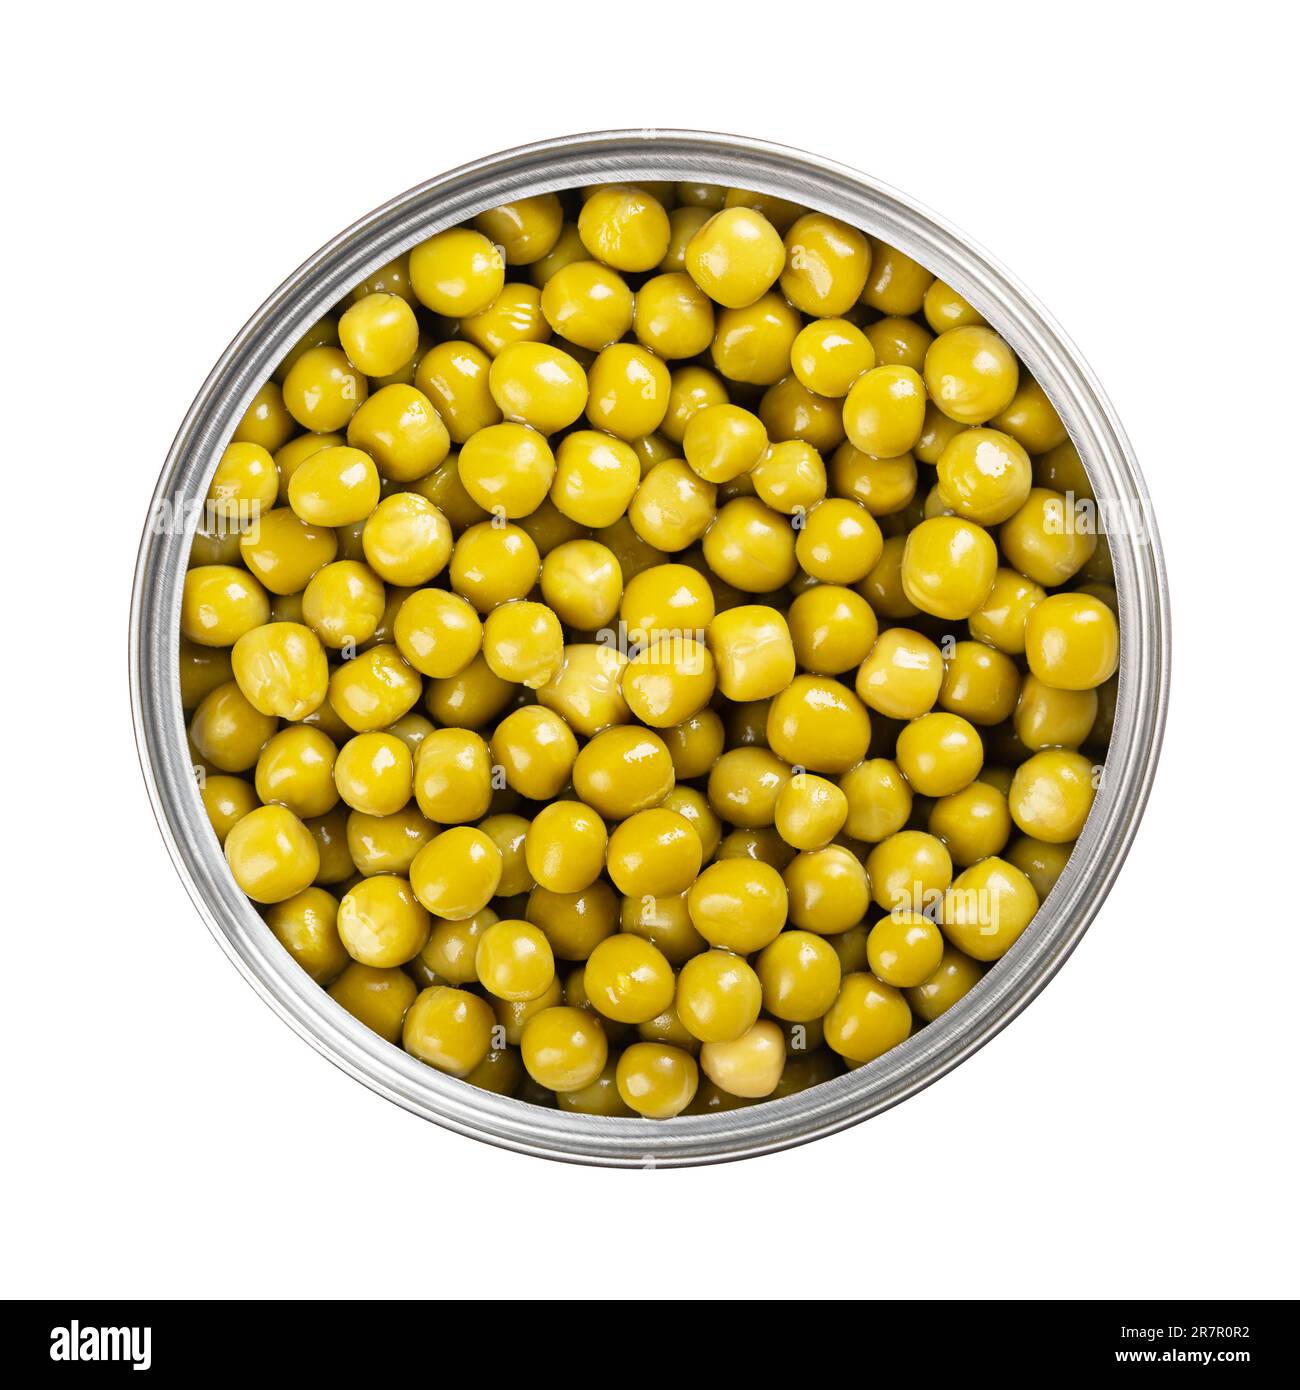 Canned green peas, in an open can. Small spherical seeds of the pod fruit Pisum sativum, boiled and canned to preserve the legumes. Stock Photo